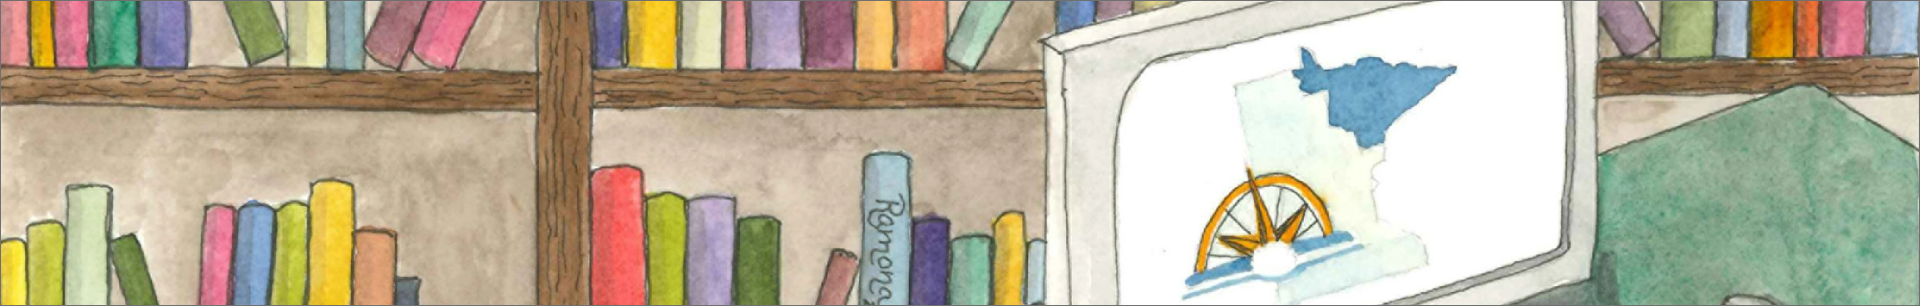 Drawing of books on a shelf with a drawing of the state of Minnesota and Arrowhead county.